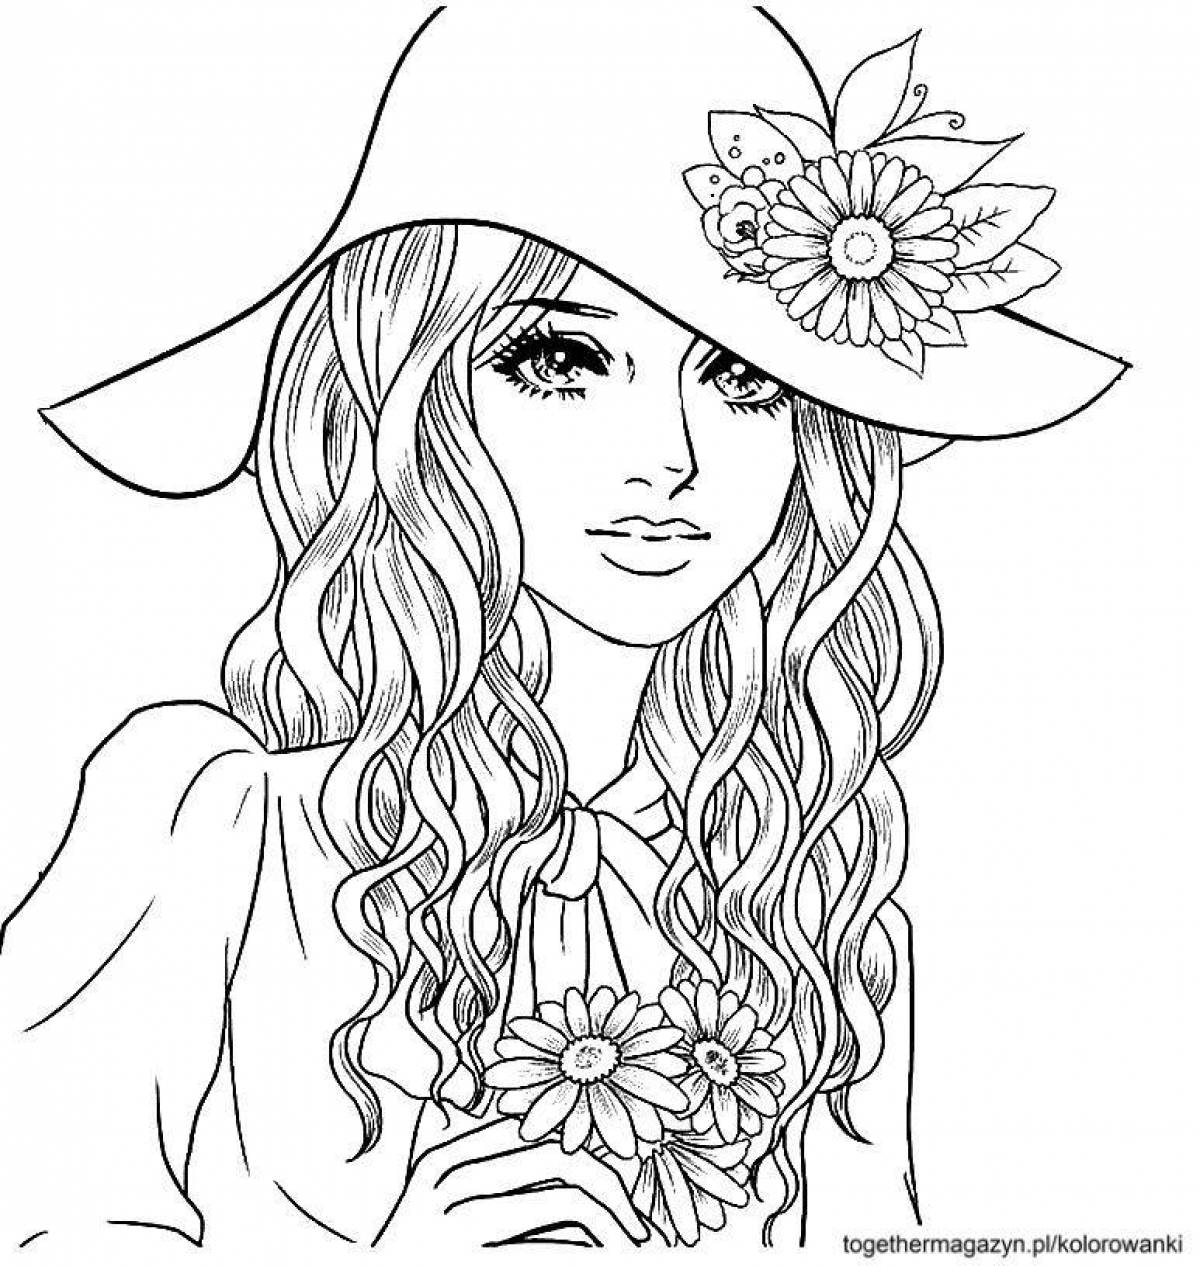 Sublime coloring page girls 18 years old beautiful